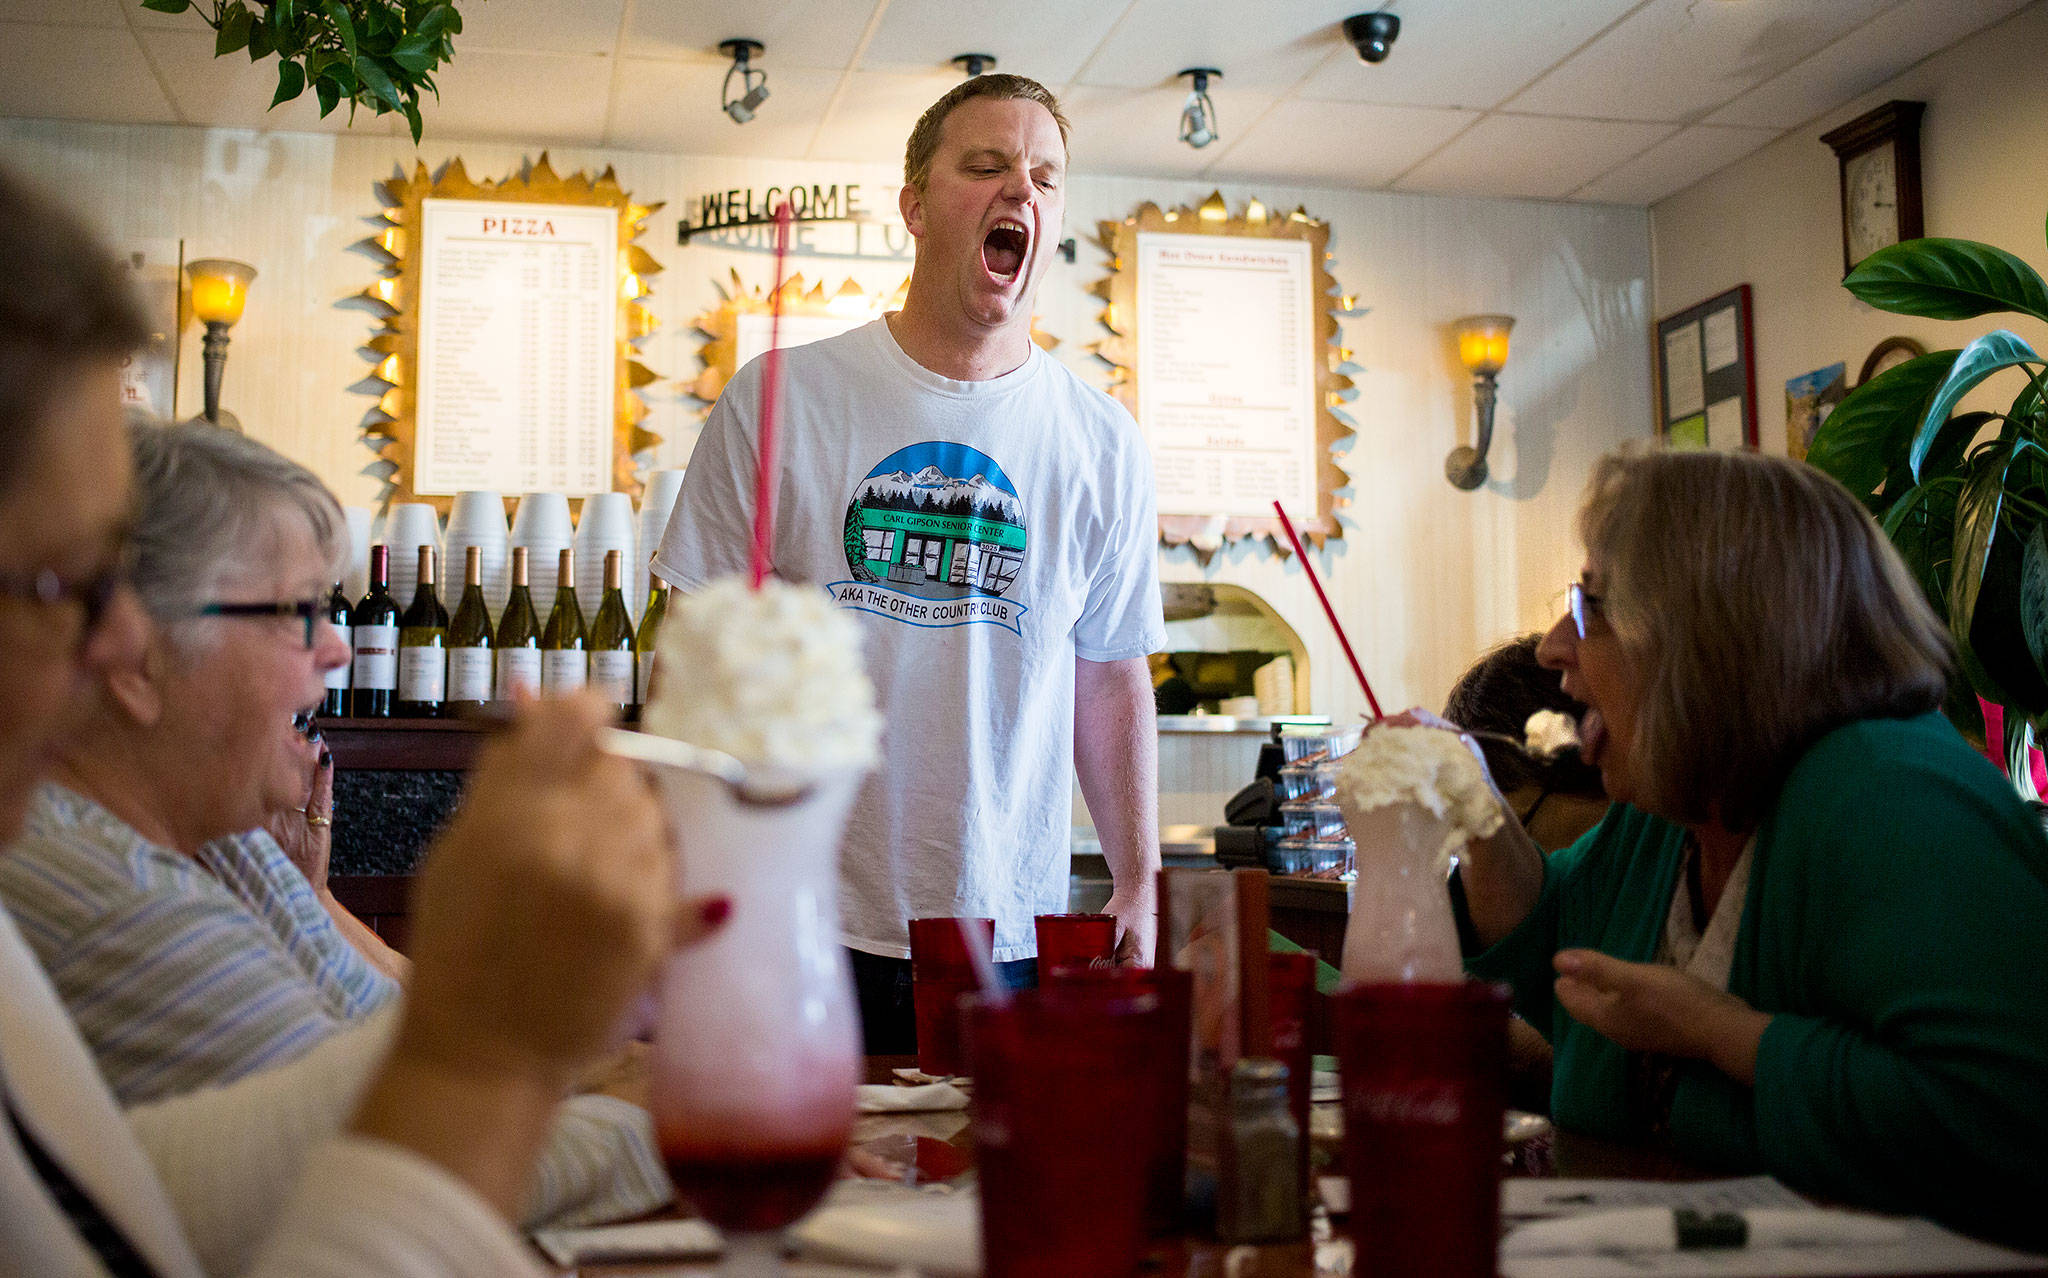 Program coordinator Eric Wollan dares Paula Darrow (right) to eat the whipped cream off her Italian soda like a shark during a group trip from the Everett Senior Center to Contos Pizza & Pasta on Sept. 17 in Lake Stevens. (Andy Bronson / The Herald)